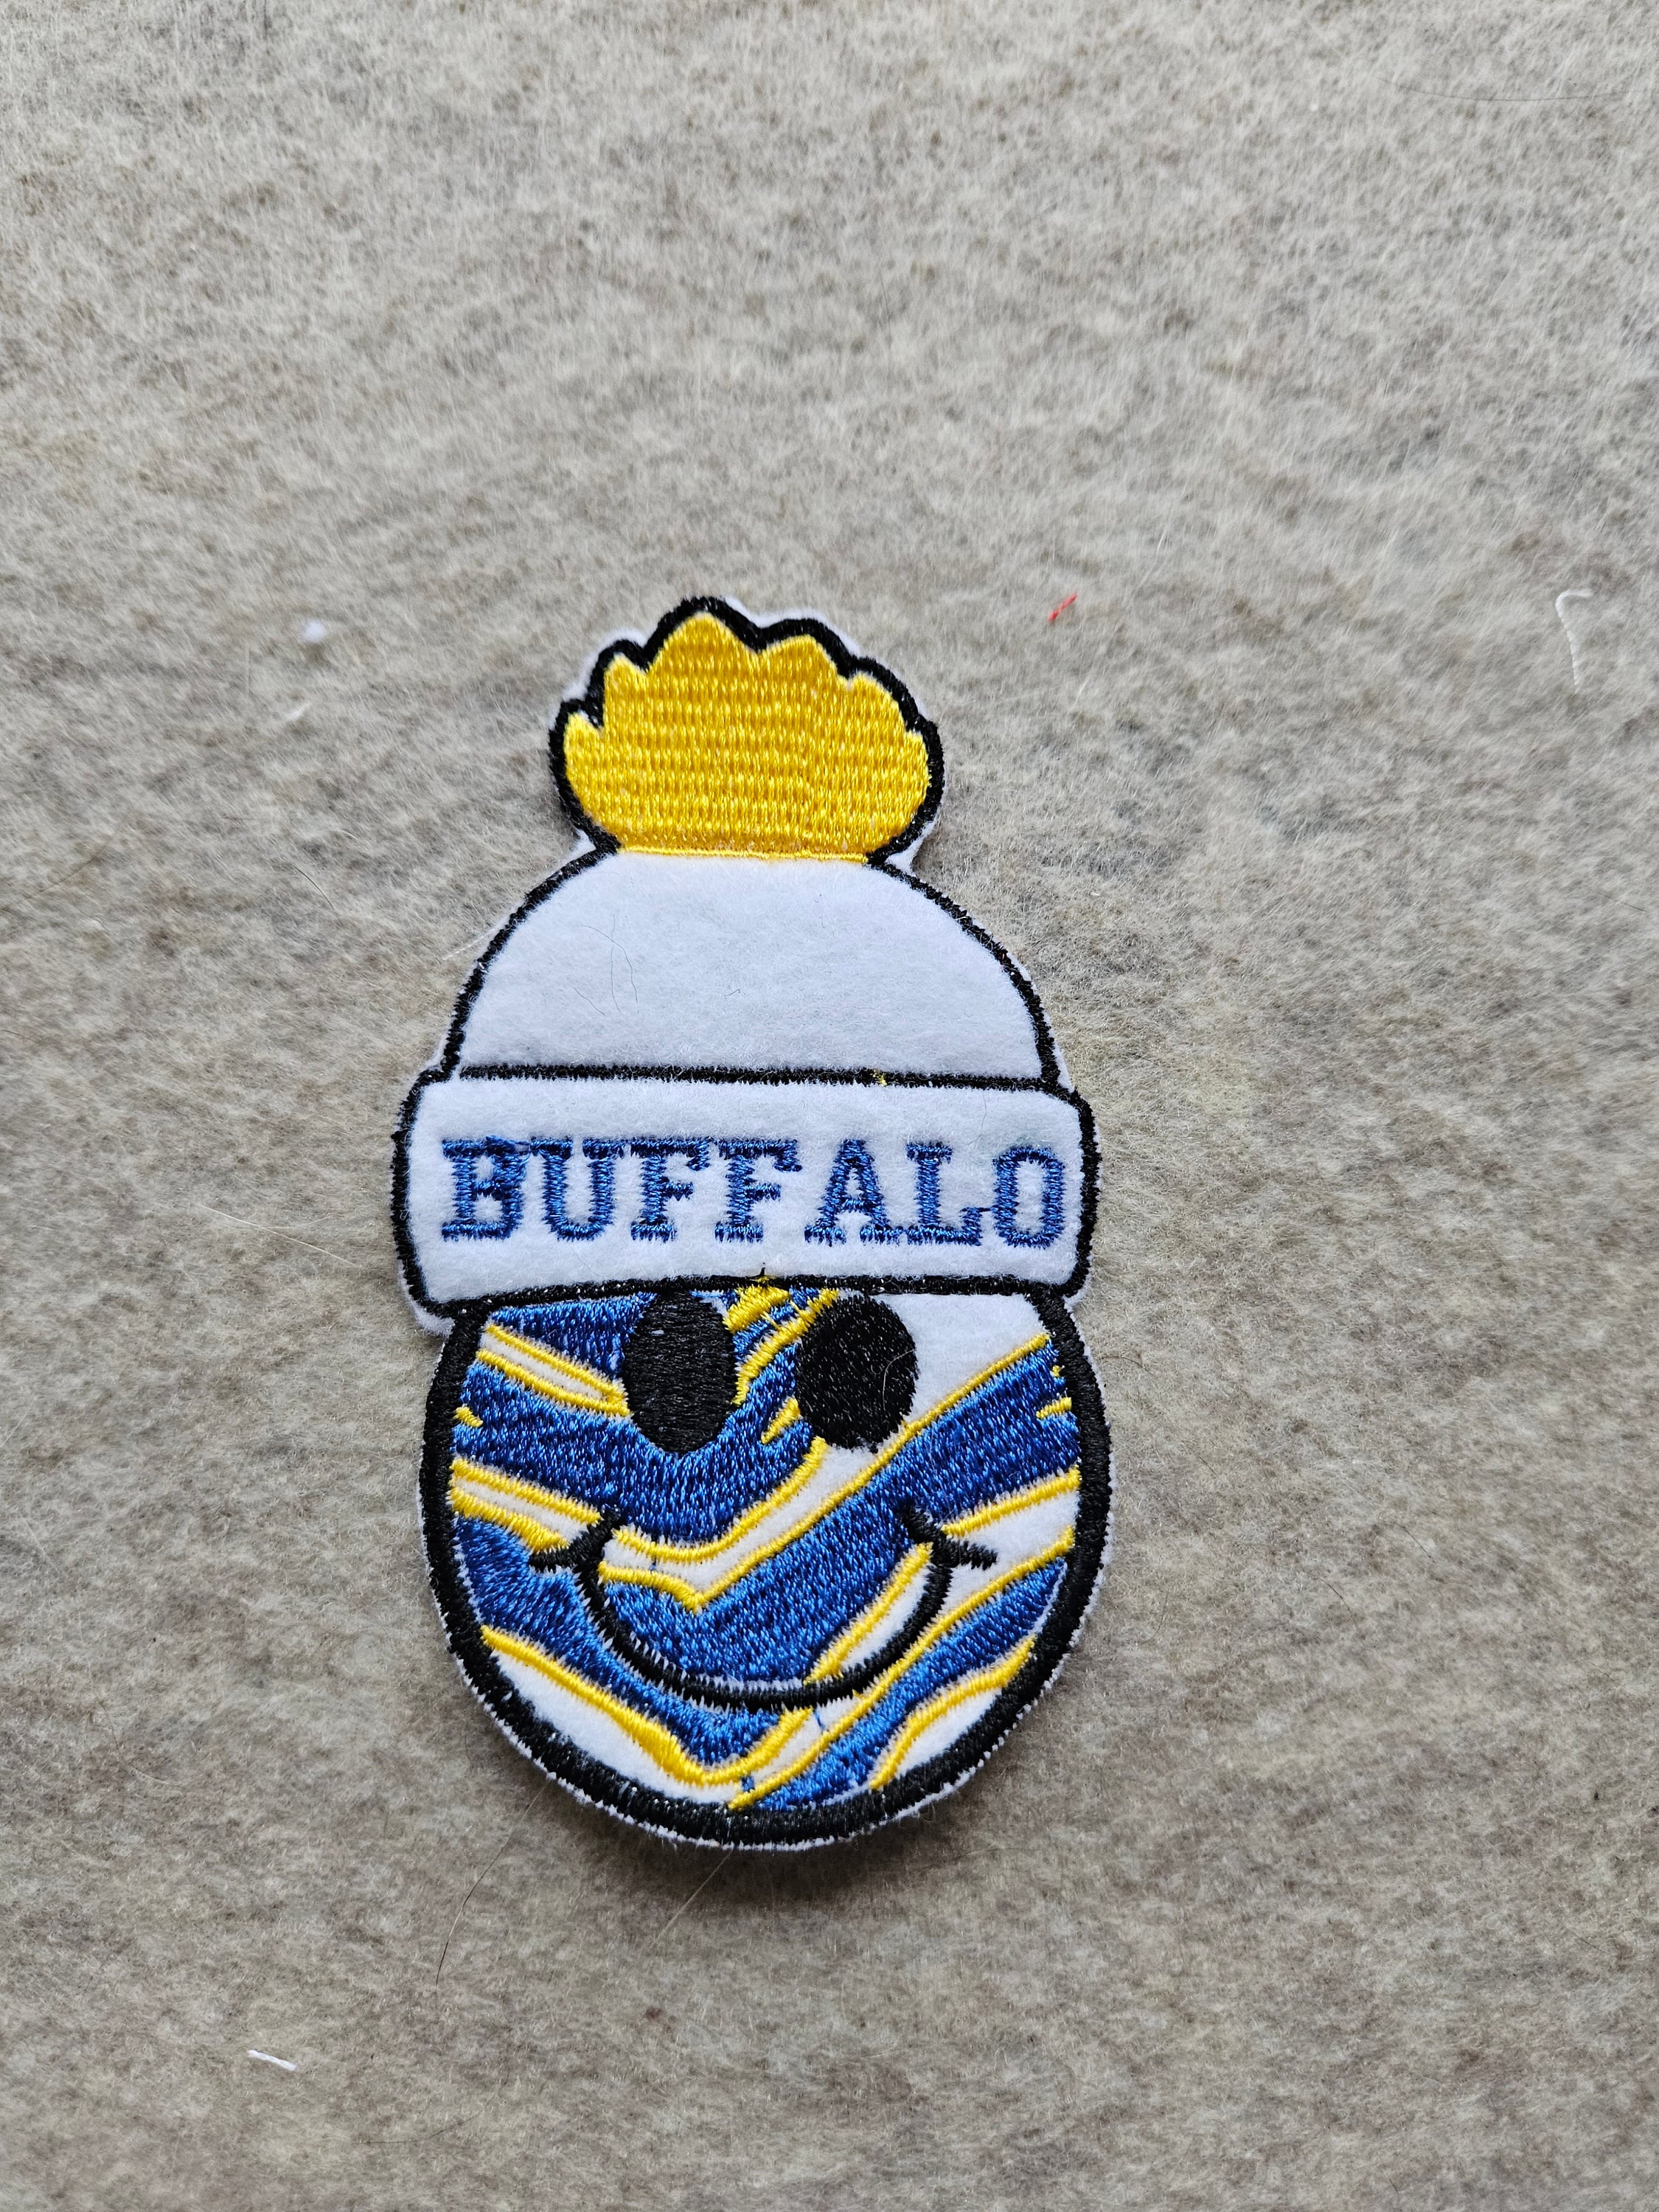 Buffalo Sports Smiley Face Patch 2 Sizes Available Iron On 